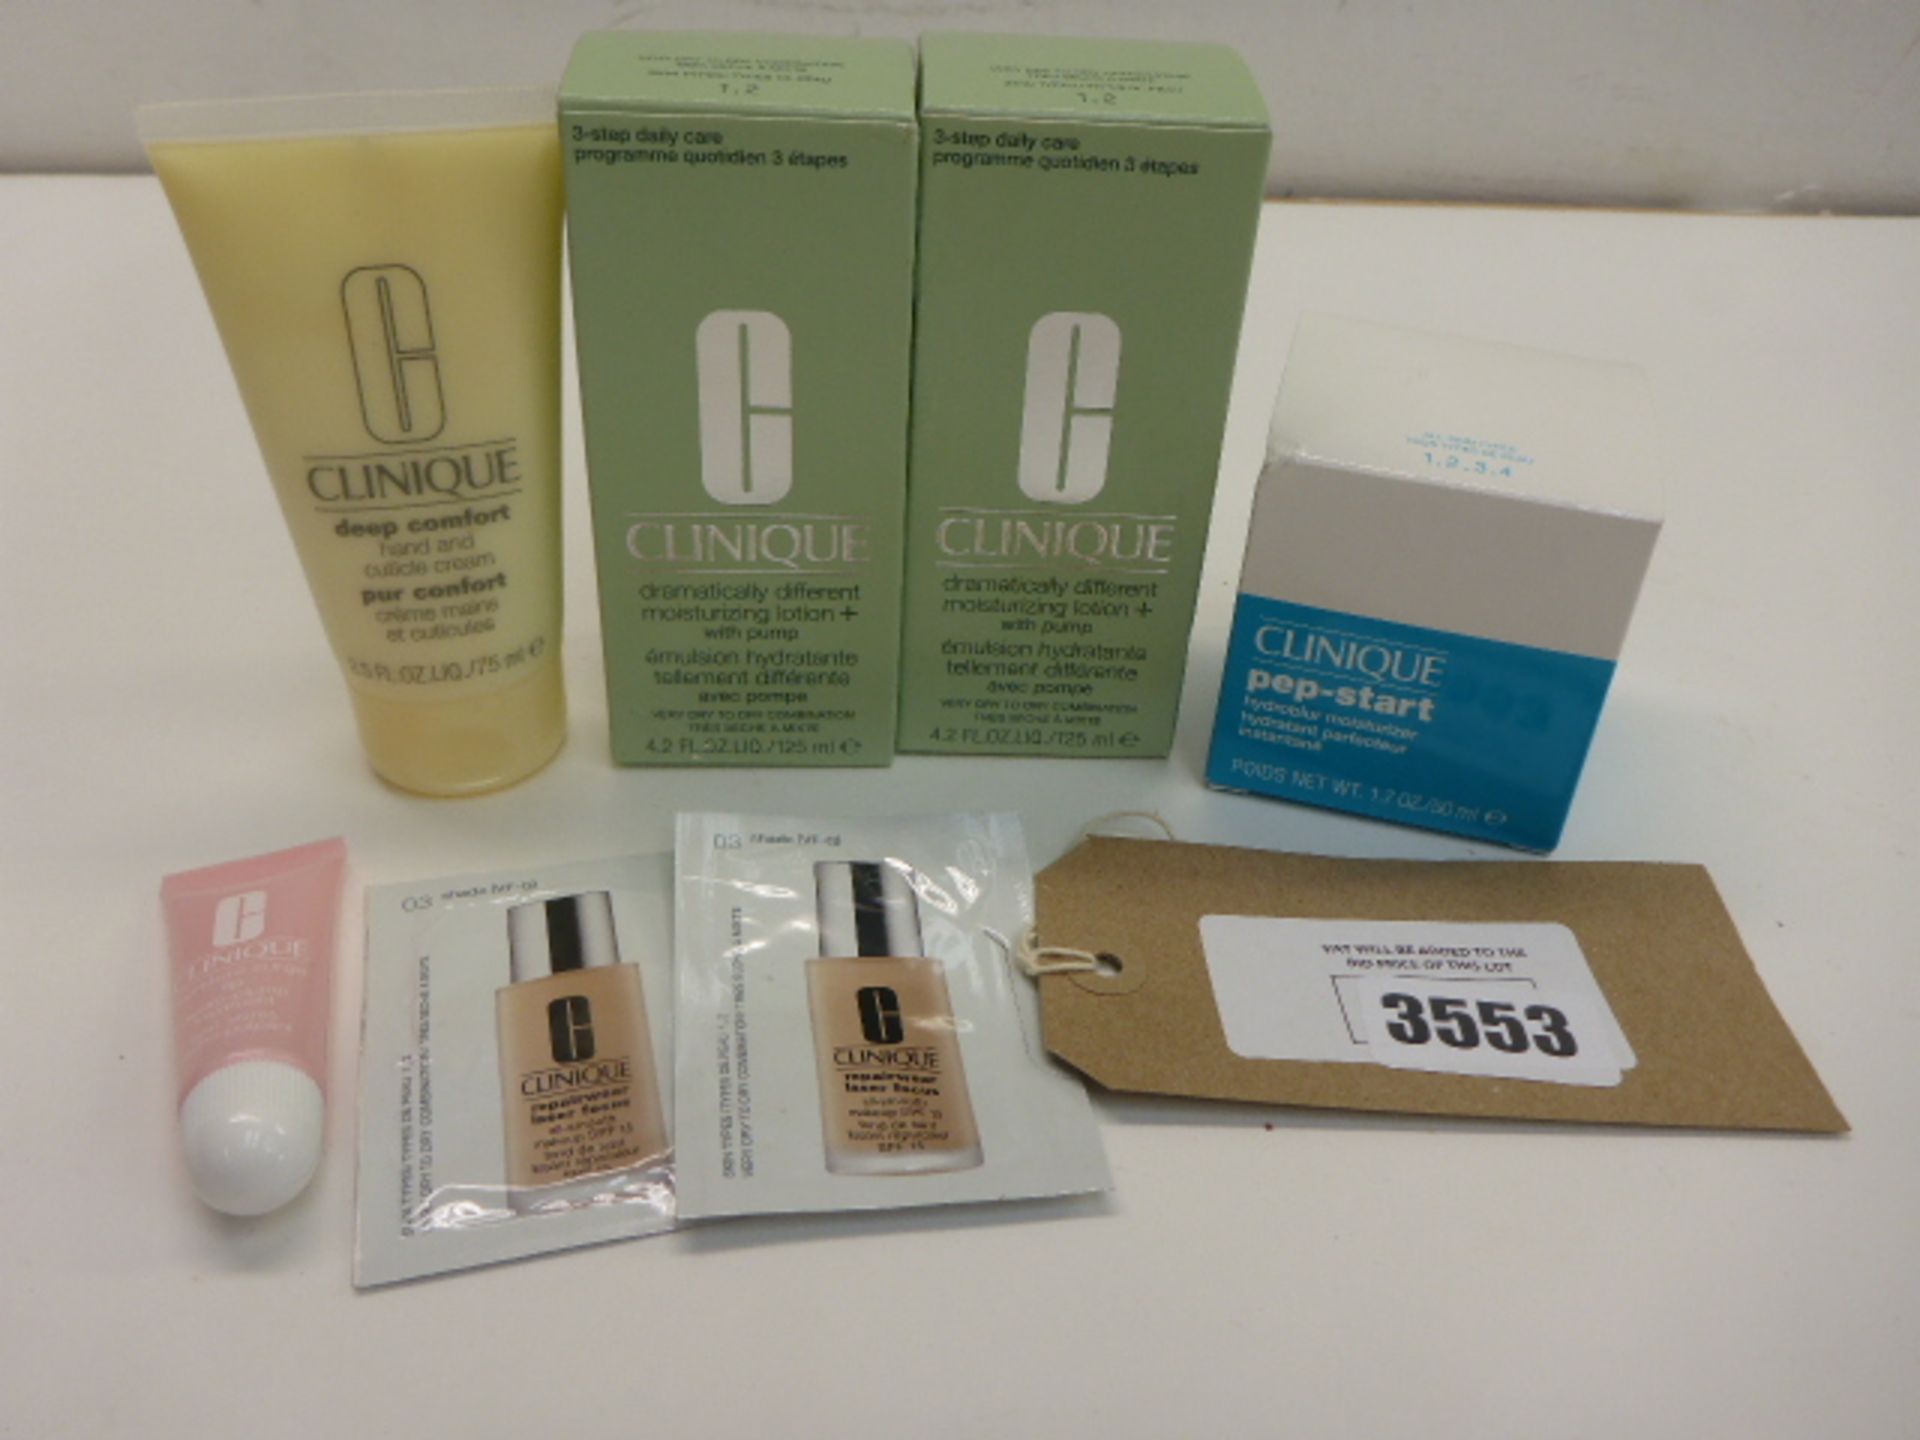 Selection of Clinique beauty products including Pep-Start, moisturizing lotion, moisture surge etc